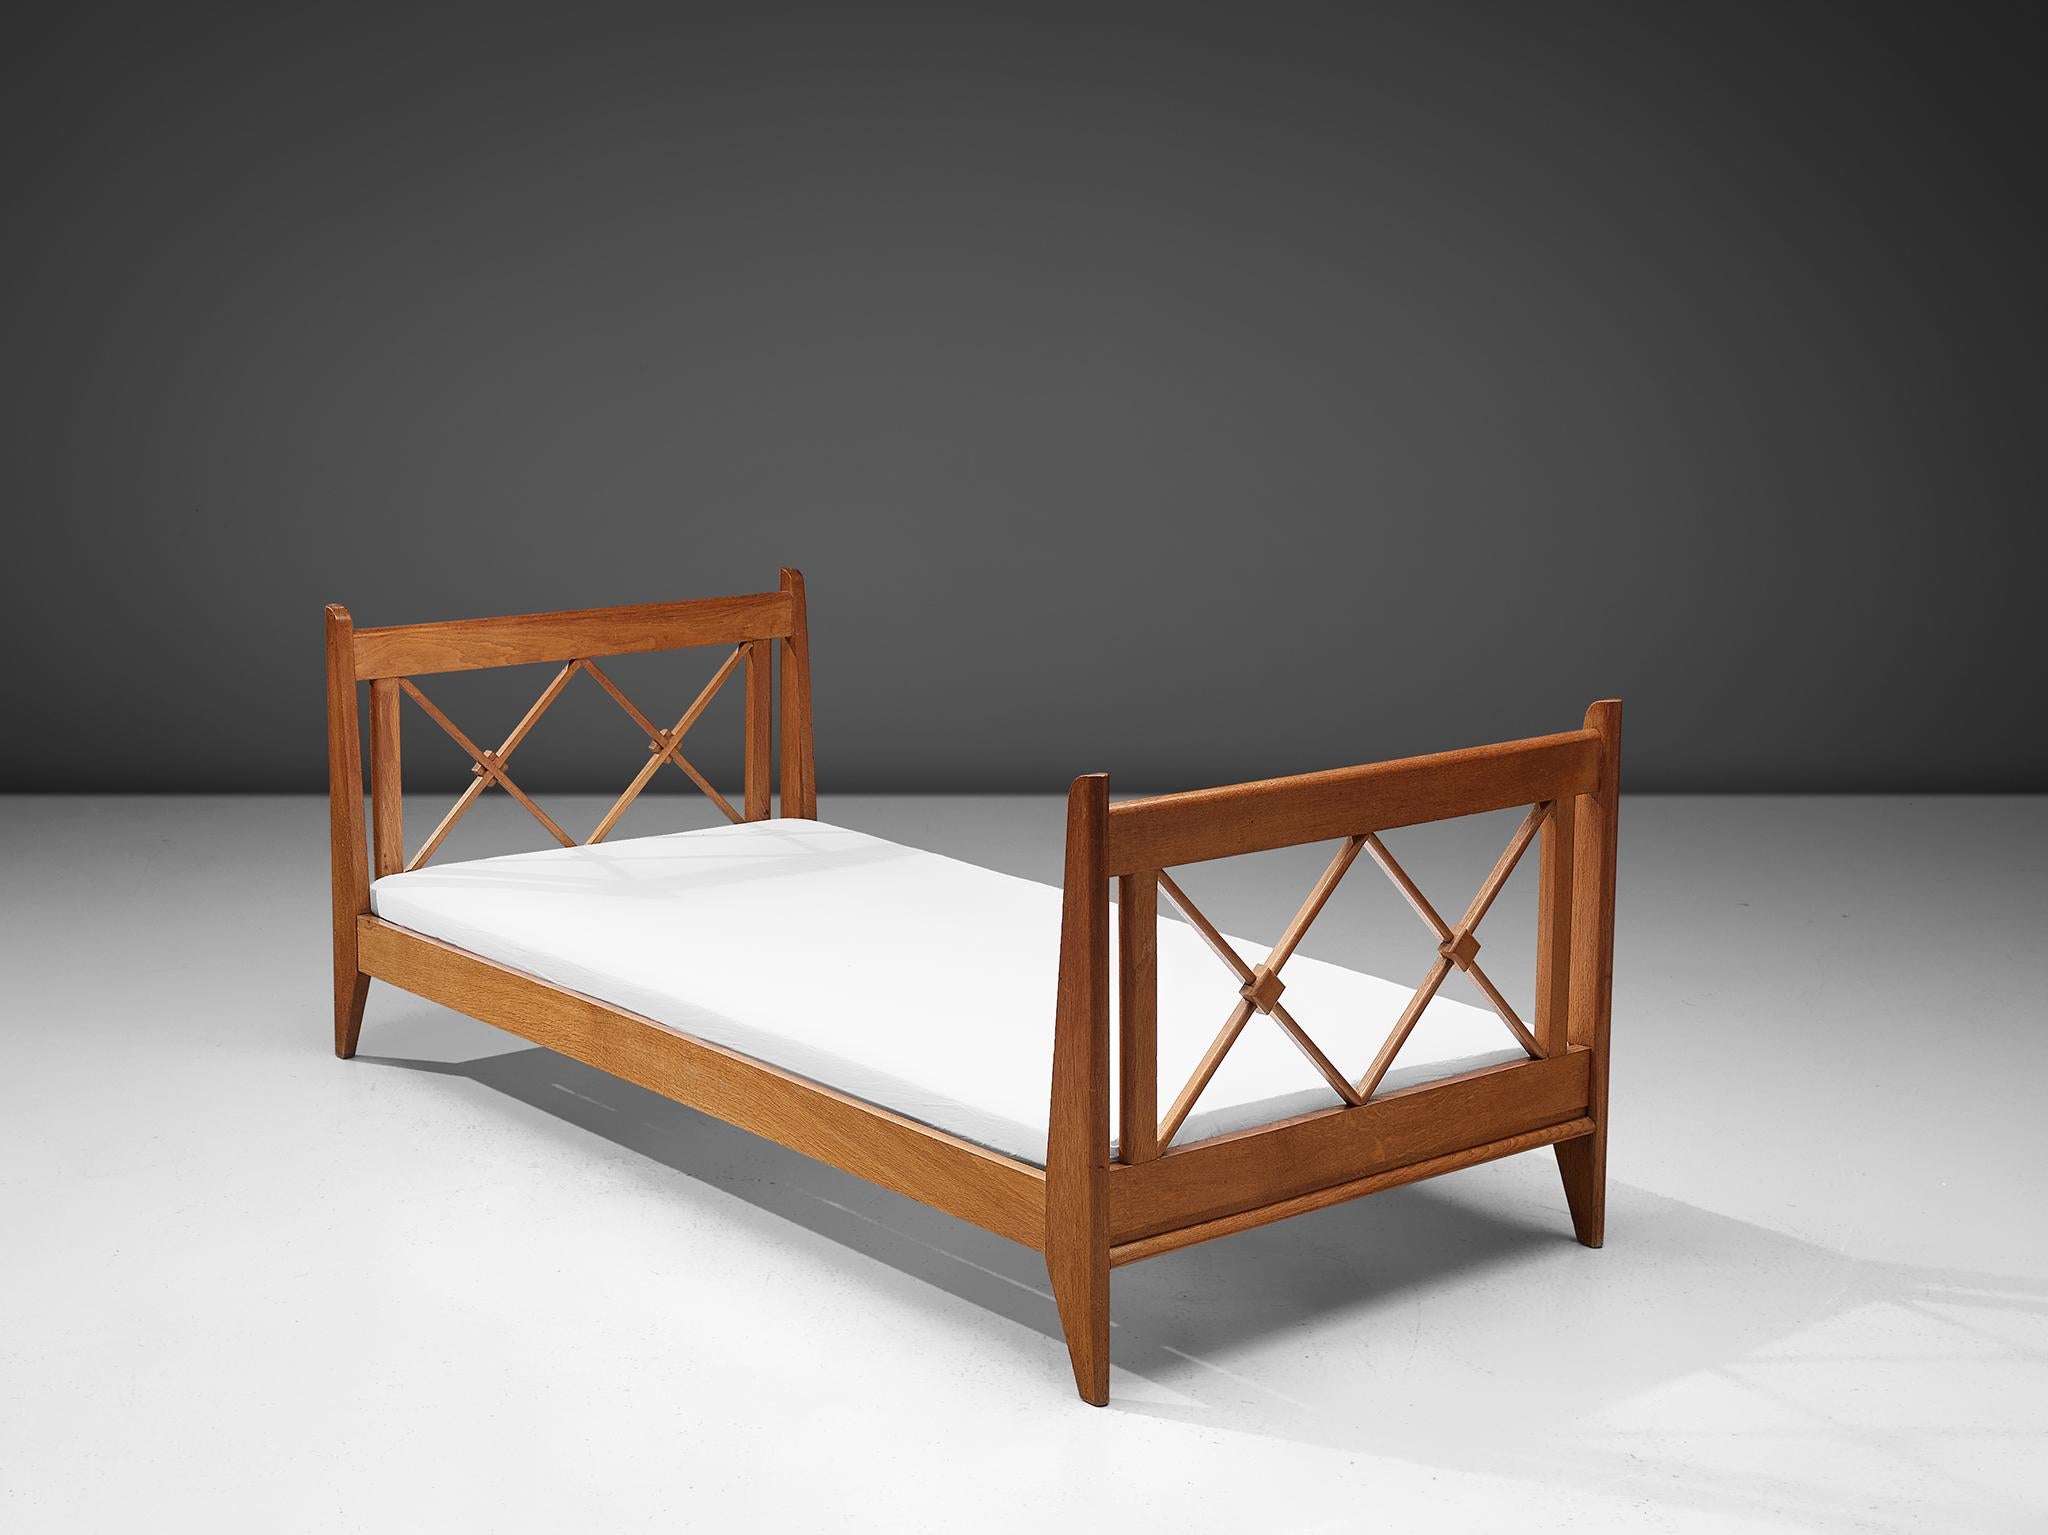 Single bed, oak, Italy, 1940s.

A beautifully made single bed in oakwood. It shows amazing craftsmanship that is evident in the interlocking crosses in the head- and footboard of the bed. The clean lines give, together with the choice of the natural